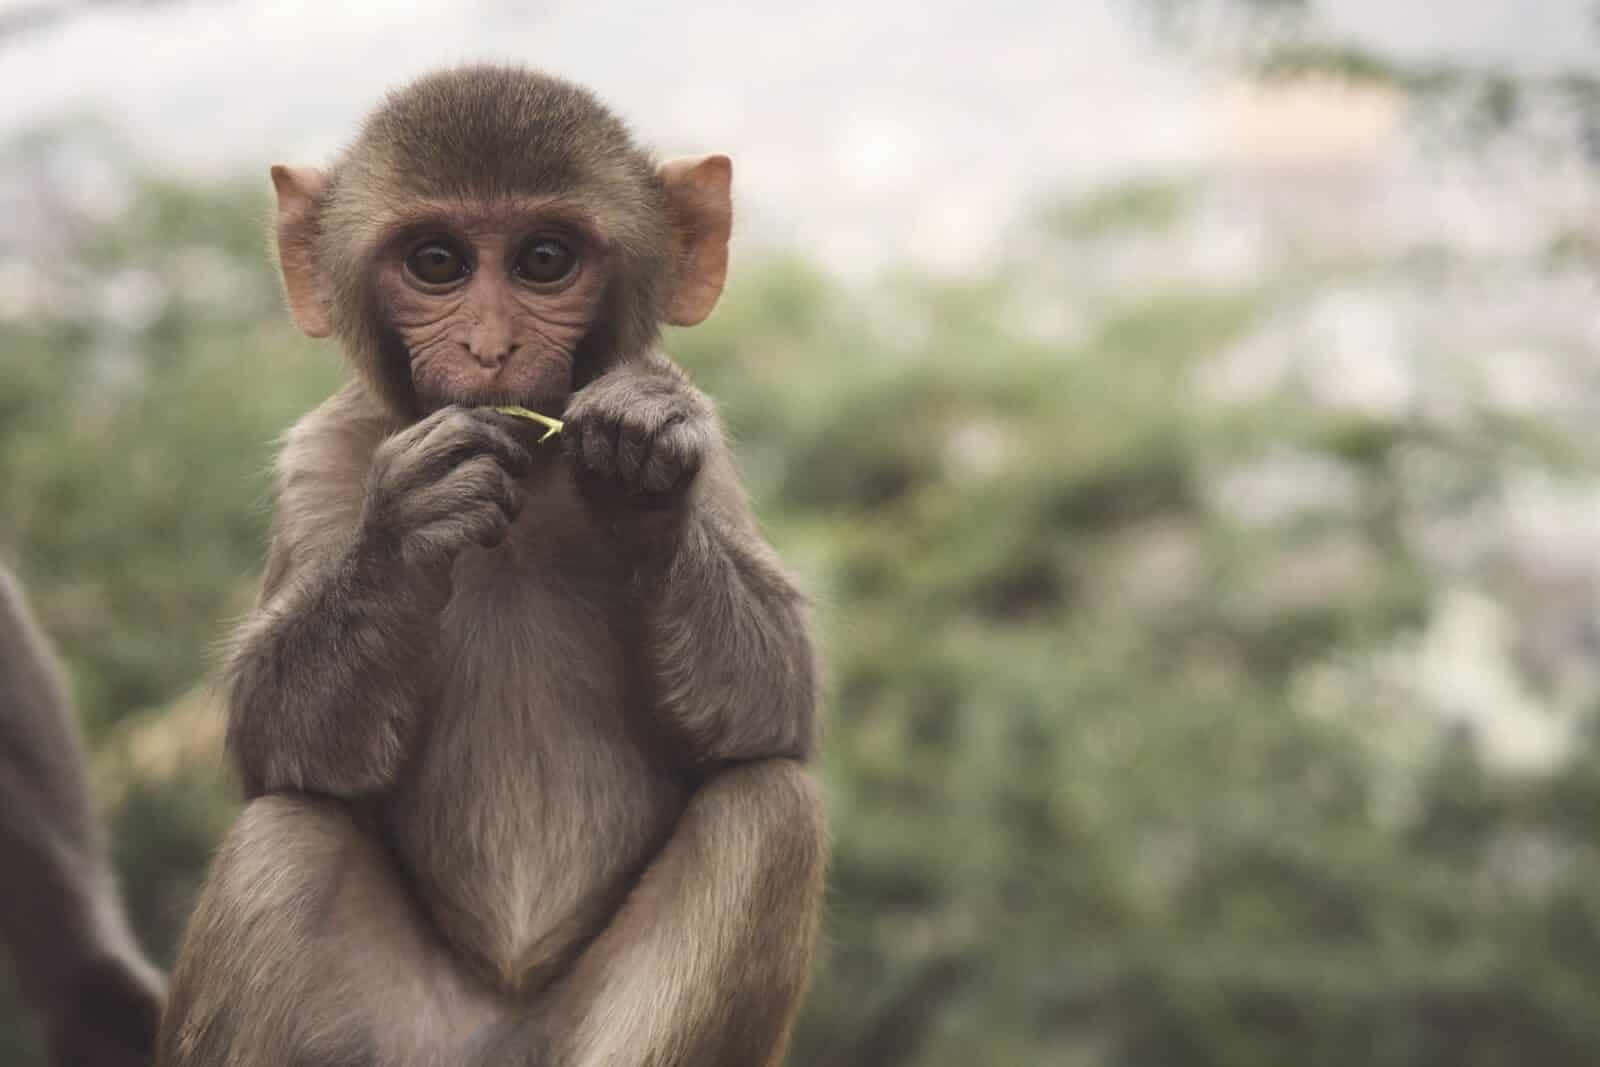 A Unique Baby Monkey Taking In Its Surroundings